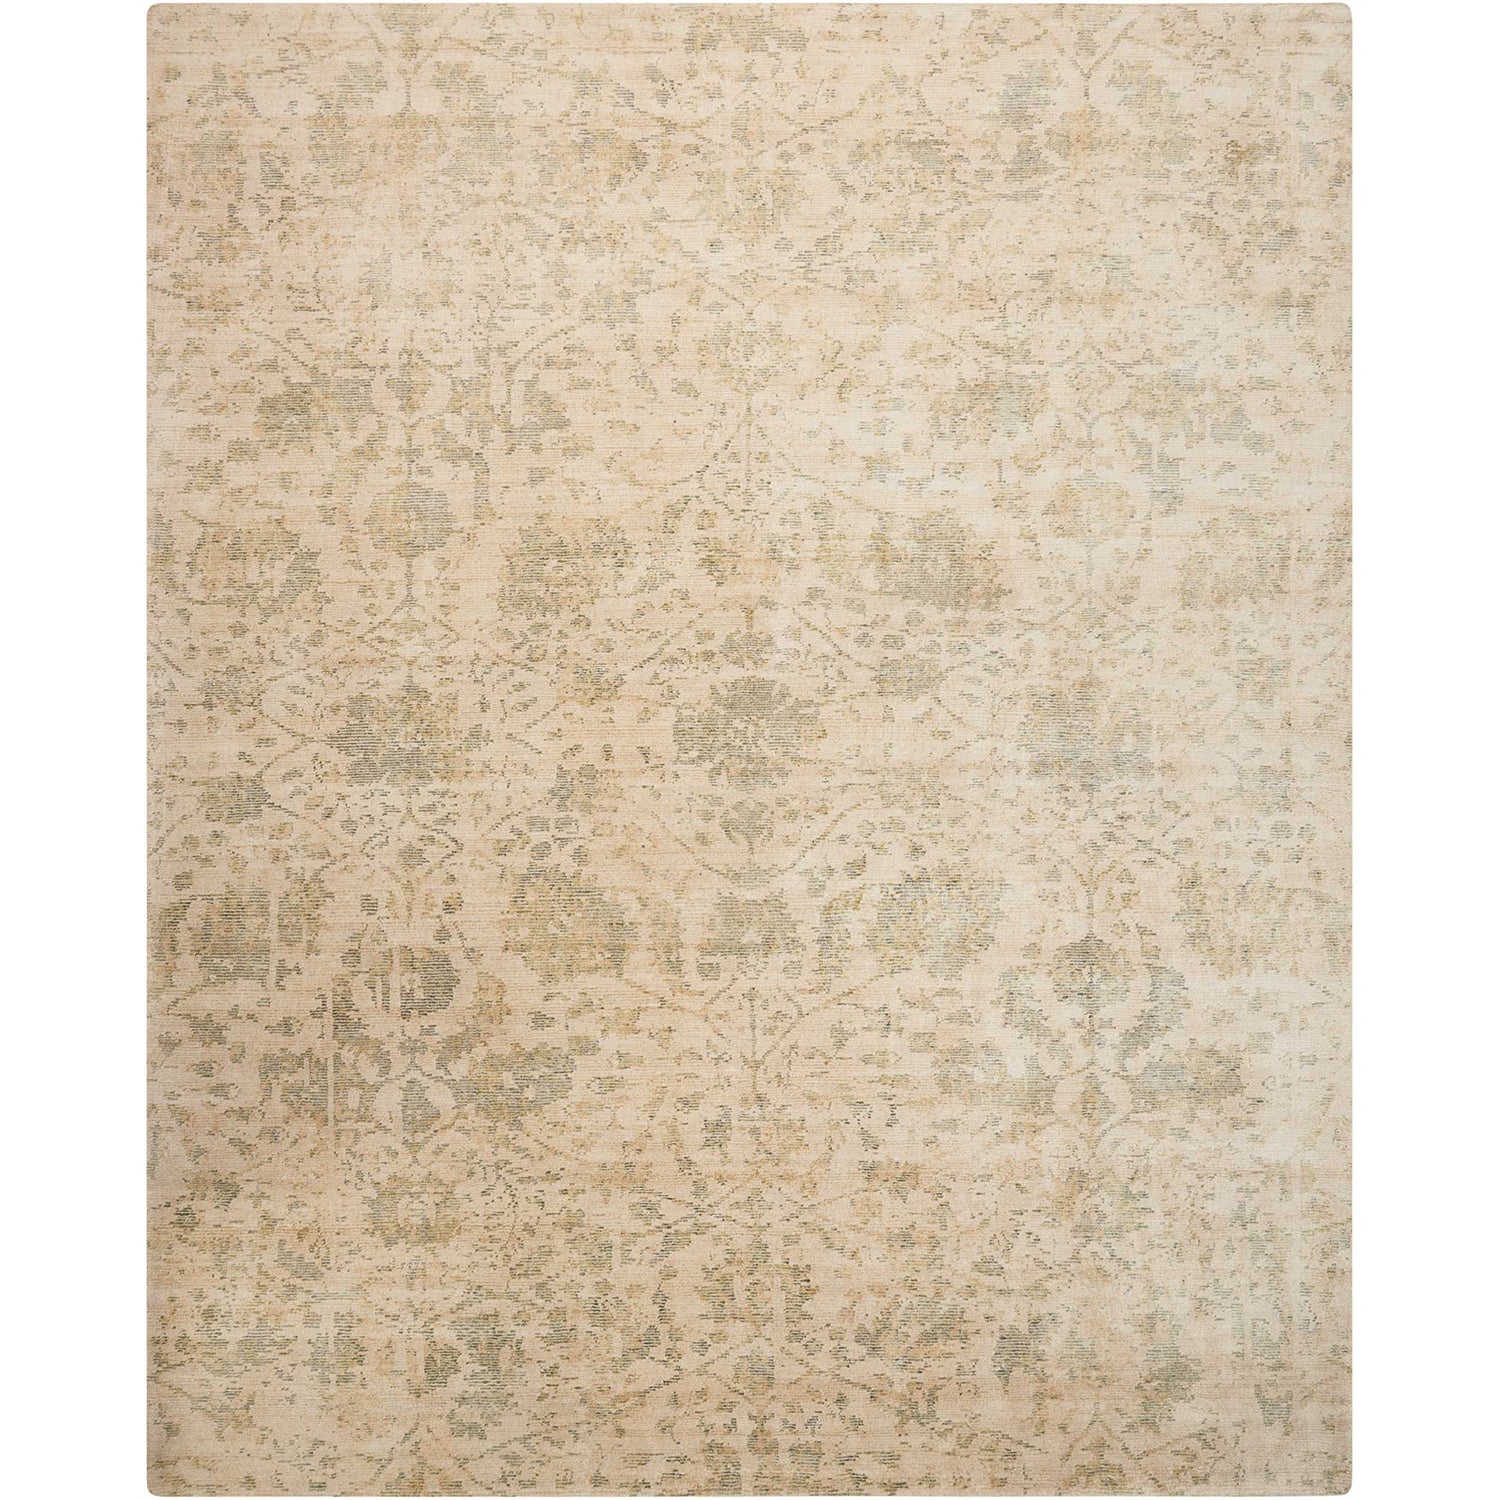 Vintage-inspired rectangular area rug with faded ornate design in beige